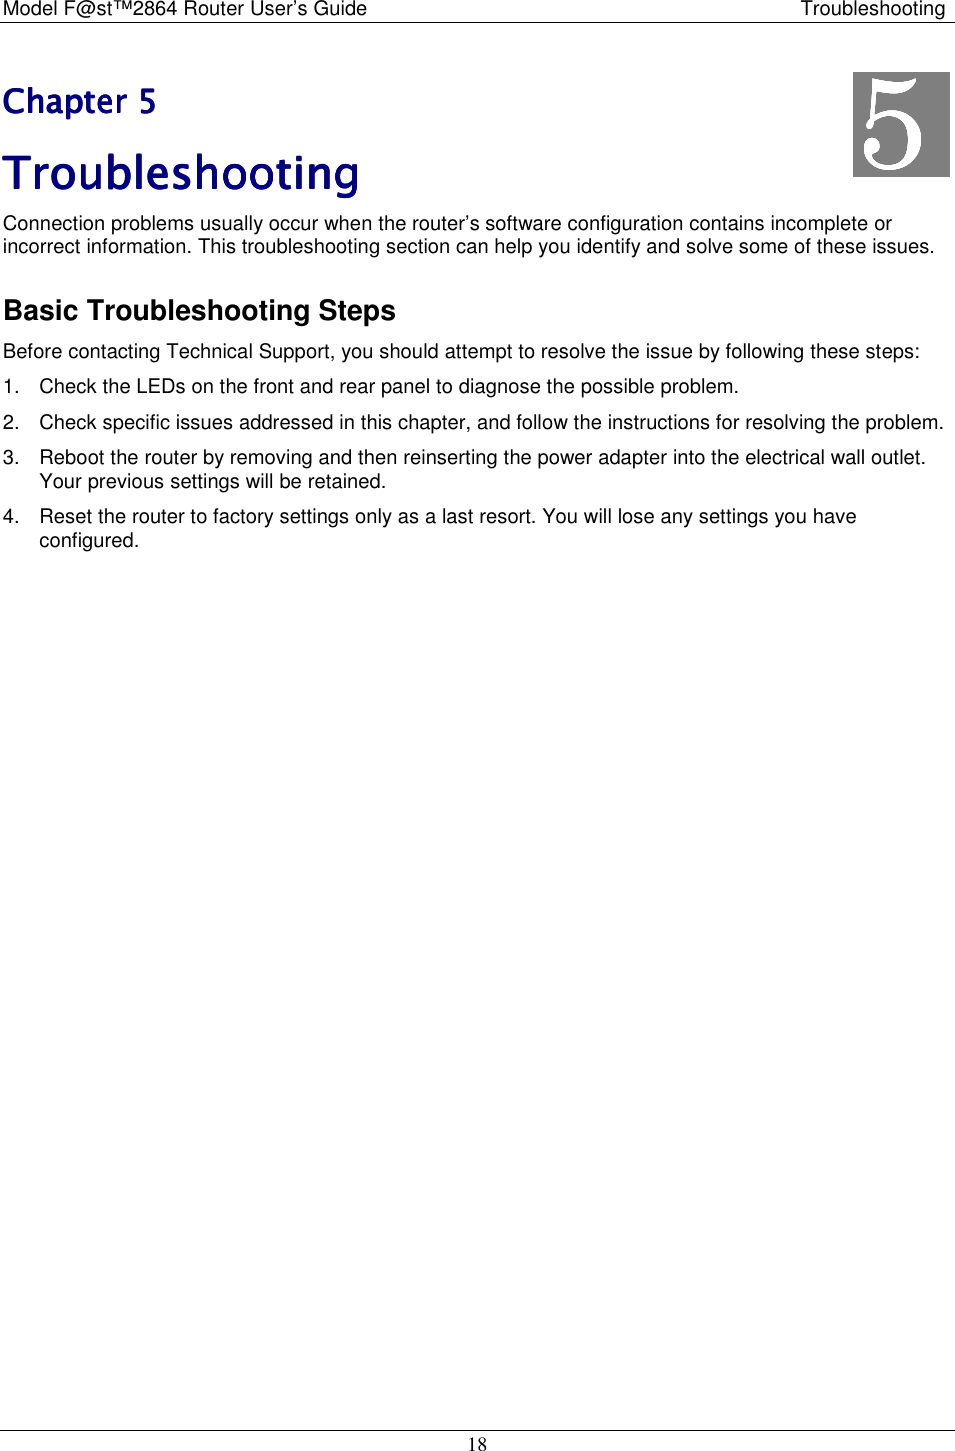 Model F@st™2864 Router User’s Guide Troubleshooting 18 Chapter 5Chapter 5Chapter 5Chapter 5    TroubleshootingTroubleshootingTroubleshootingTroubleshooting    Connection problems usually occur when the router’s software configuration contains incomplete or incorrect information. This troubleshooting section can help you identify and solve some of these issues. Basic Troubleshooting Steps Before contacting Technical Support, you should attempt to resolve the issue by following these steps: 1.  Check the LEDs on the front and rear panel to diagnose the possible problem. 2.  Check specific issues addressed in this chapter, and follow the instructions for resolving the problem. 3.  Reboot the router by removing and then reinserting the power adapter into the electrical wall outlet. Your previous settings will be retained. 4.  Reset the router to factory settings only as a last resort. You will lose any settings you have configured. 5555    